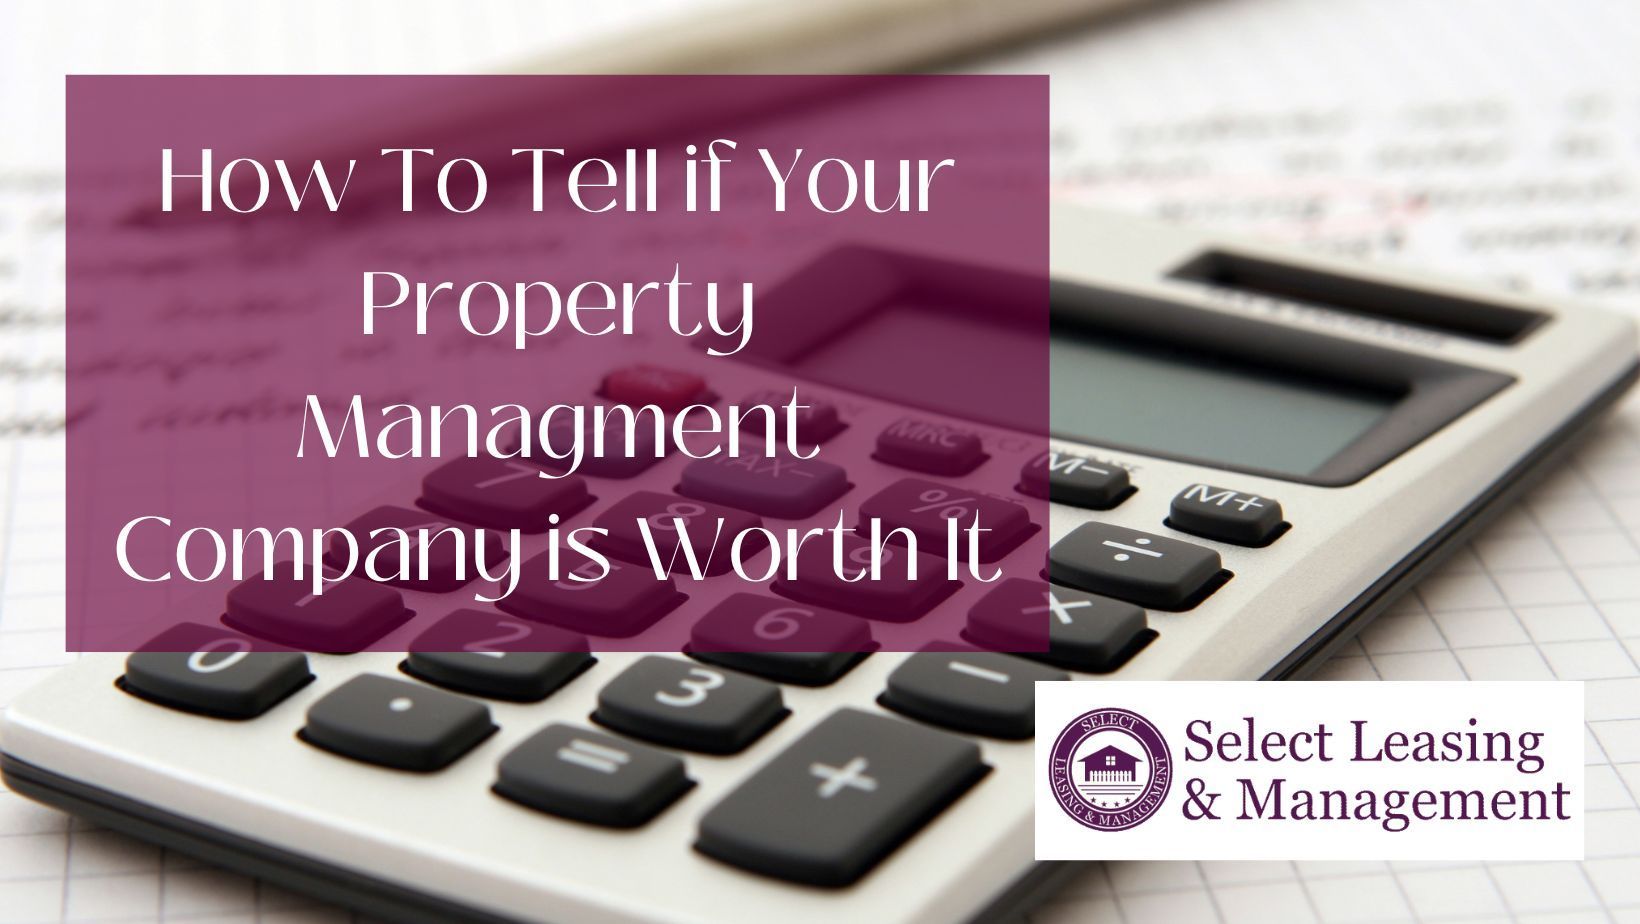 How to tell if your property management company is worht it